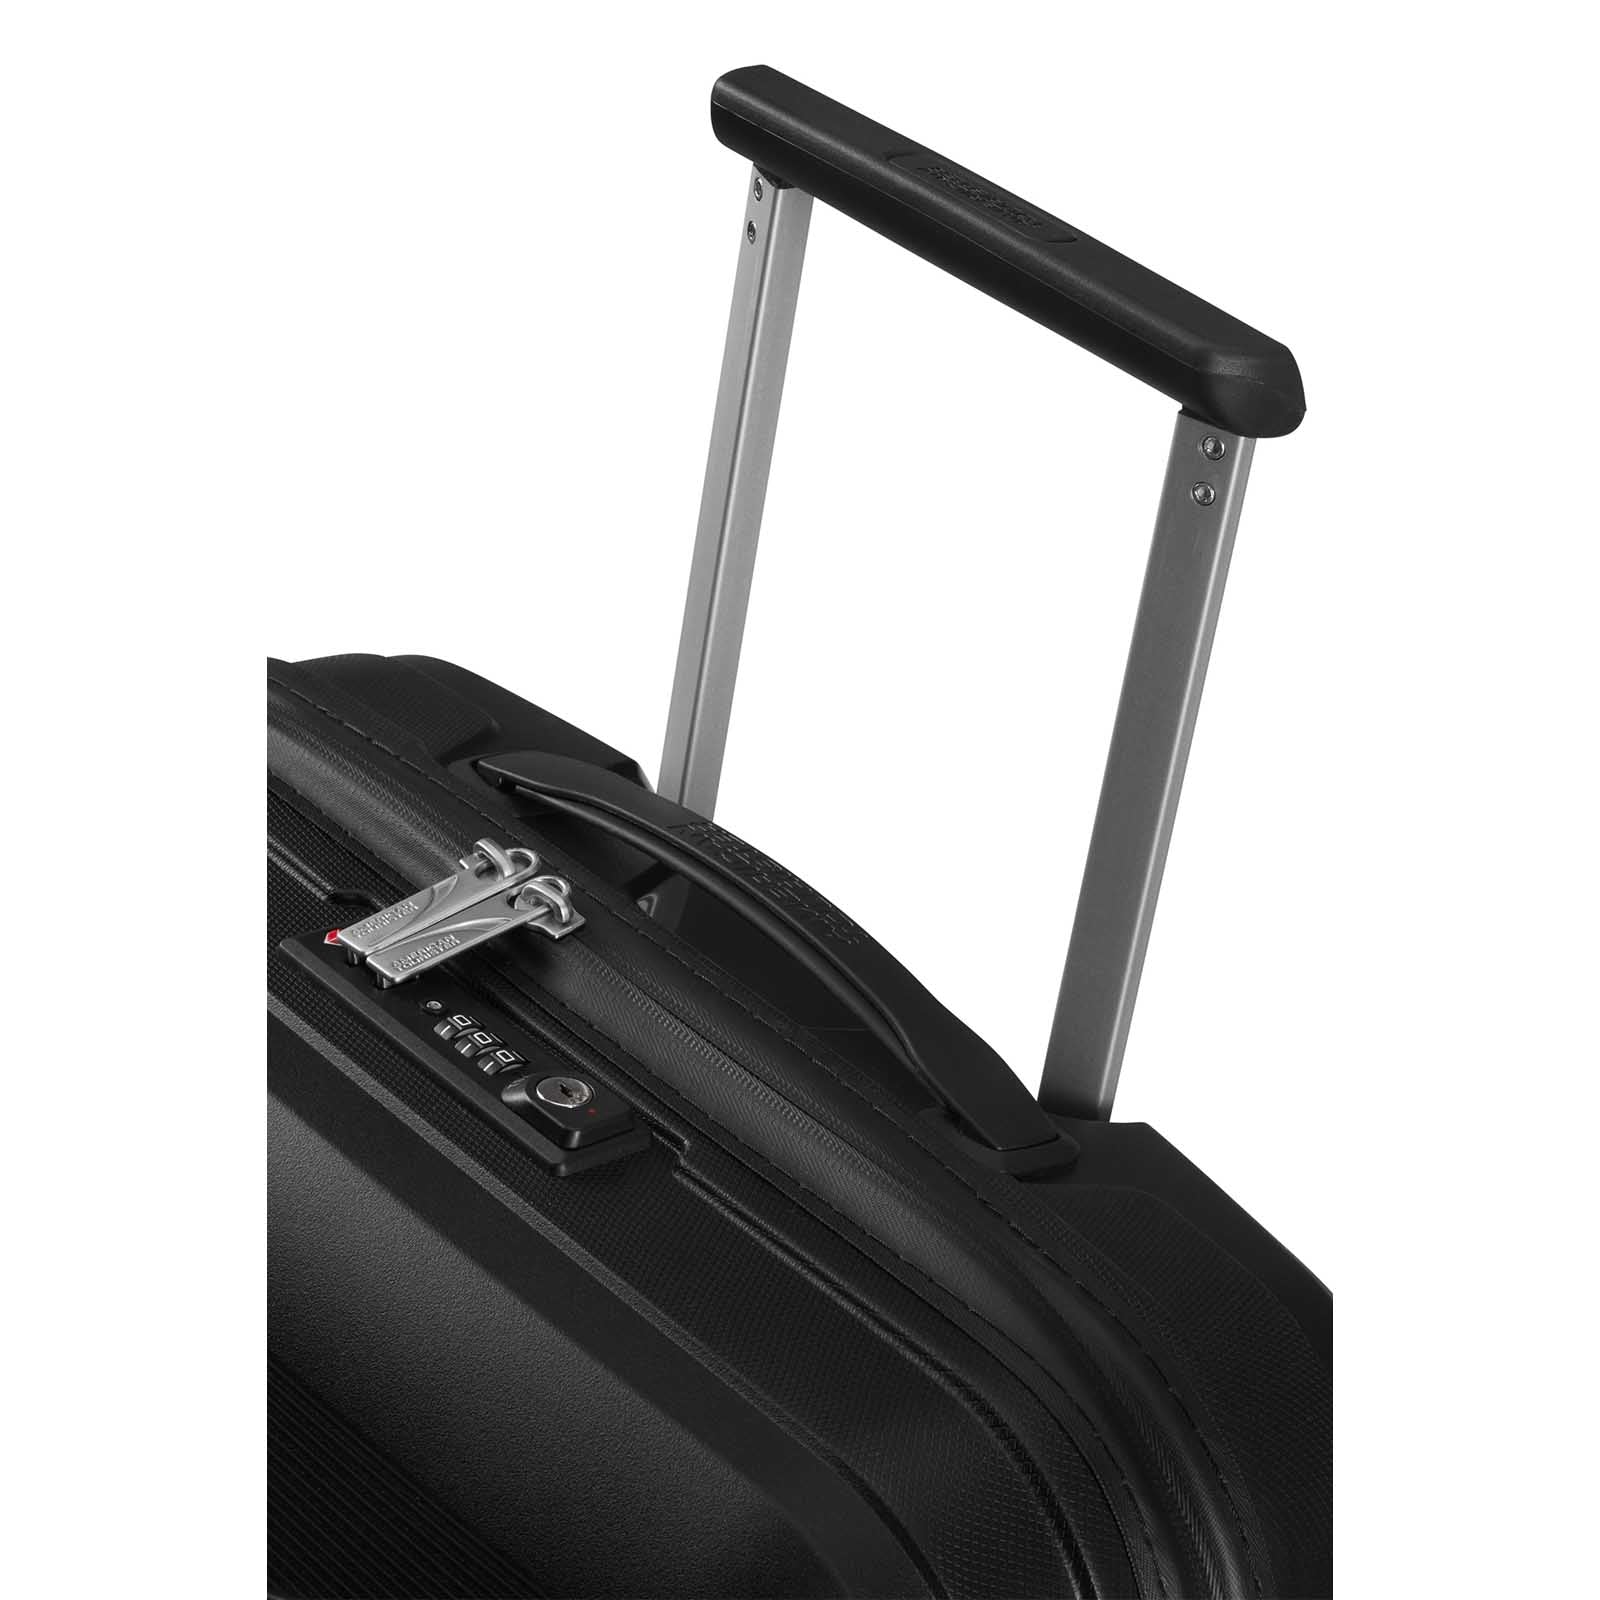 American-Tourister-Airconic-67cm-Suitcase-Onyx-Black-Trolley